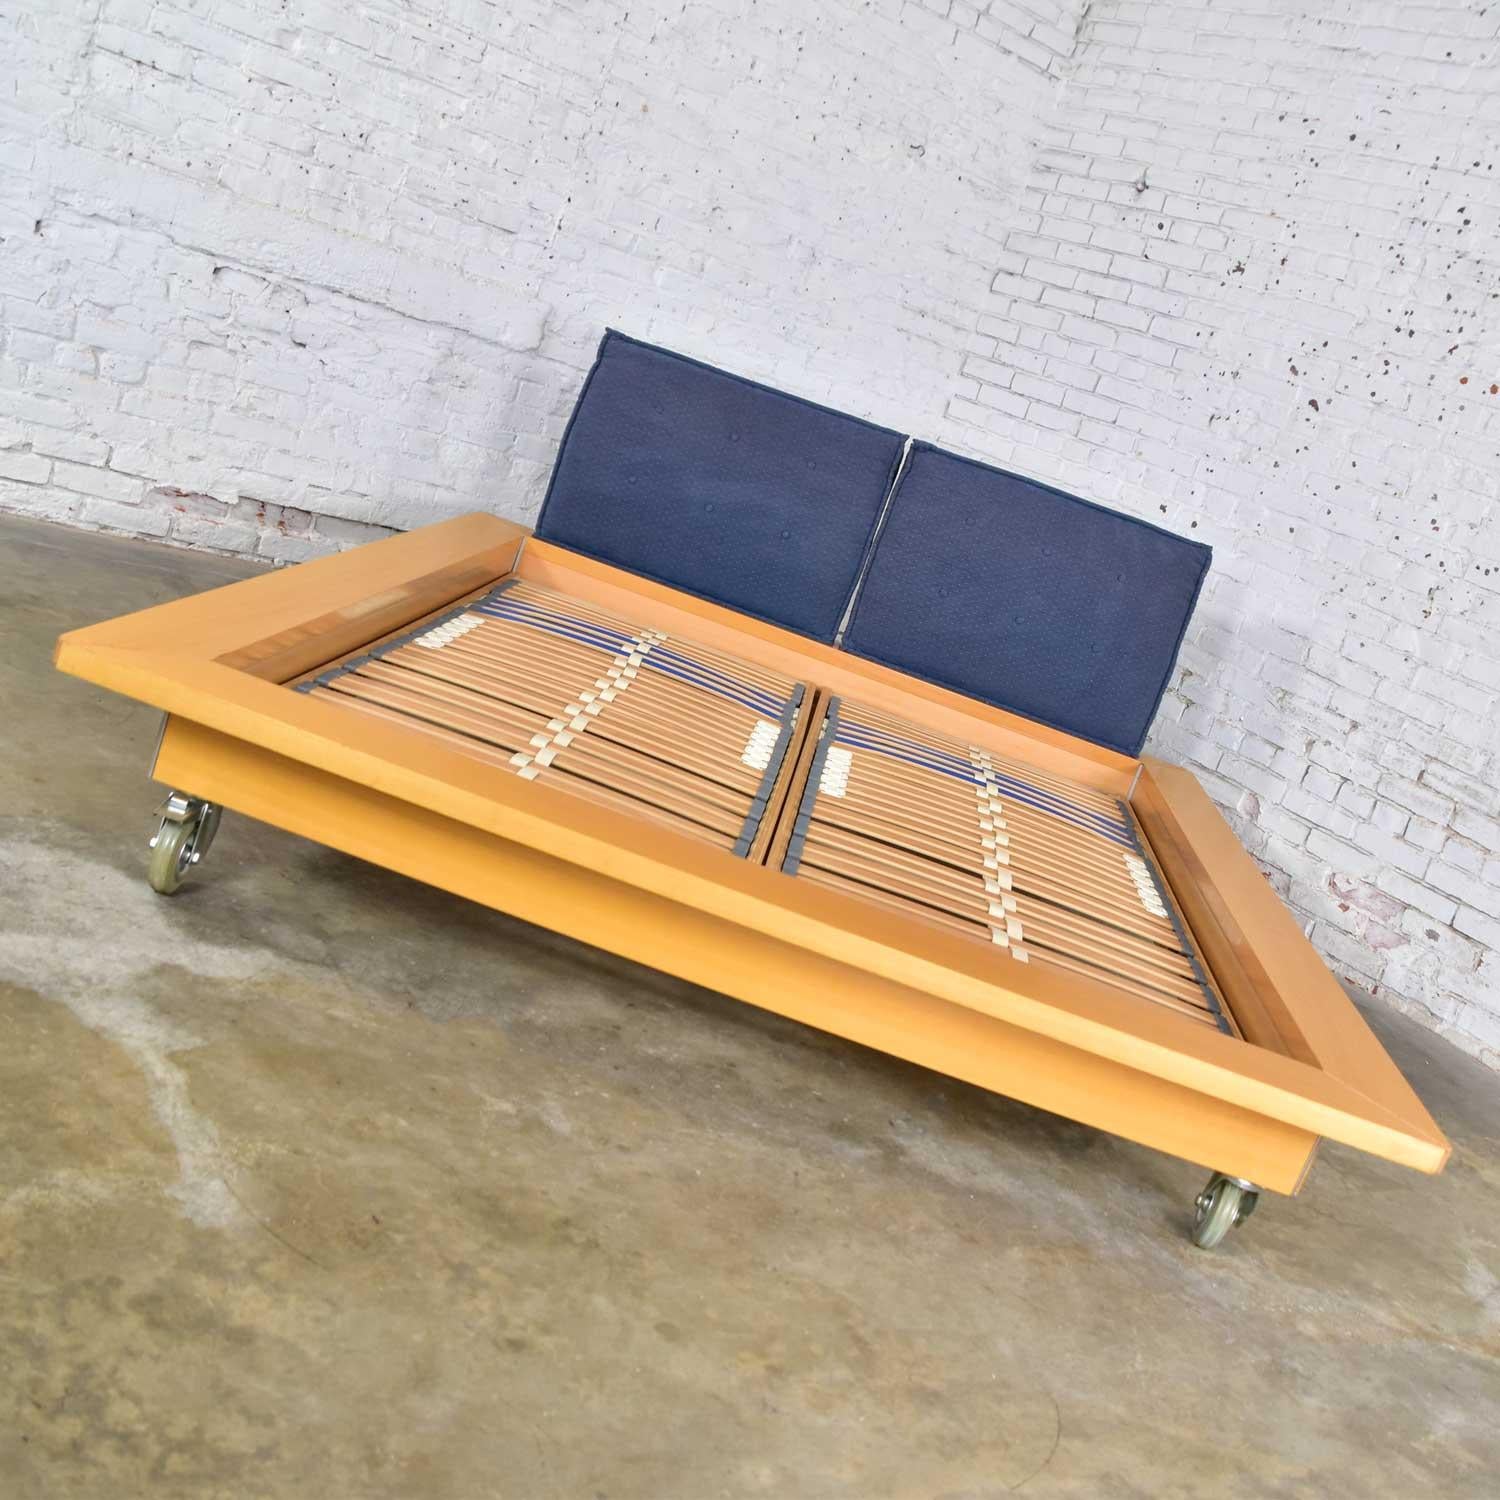 20th Century Ligne Roset Parallele Postmodern Platform Bed Attributed to Peter Maly